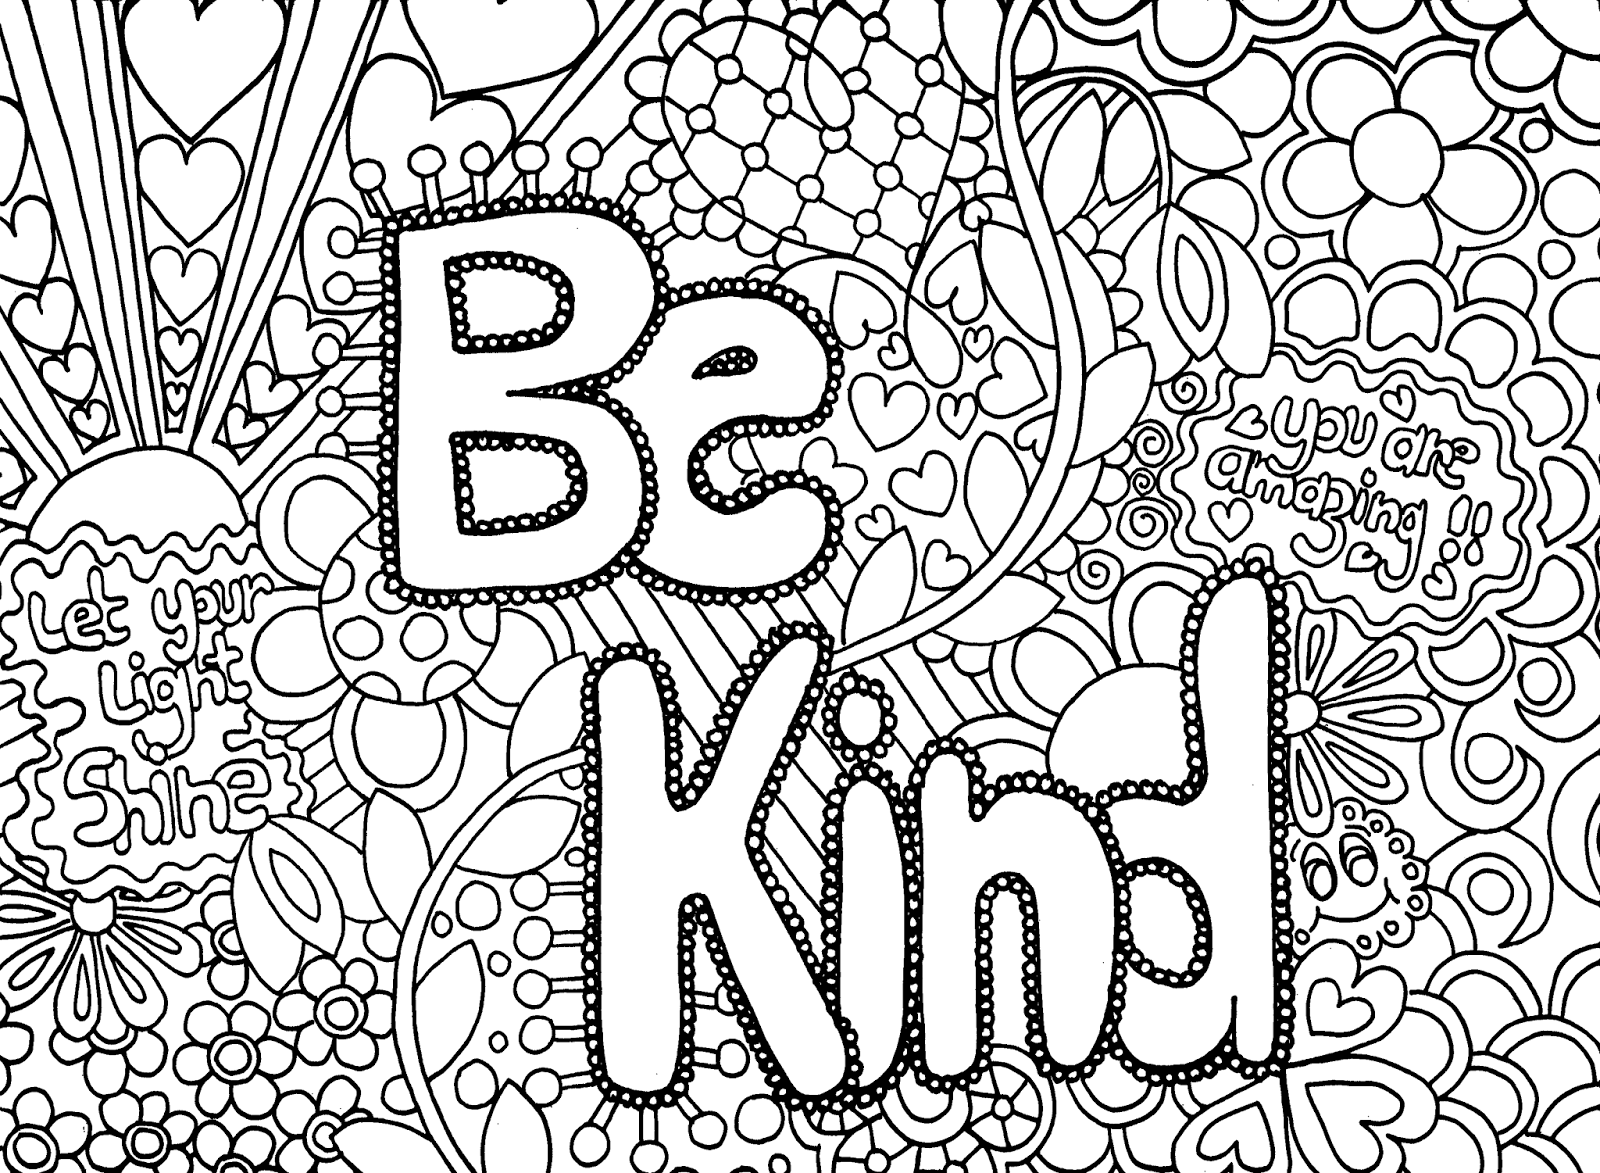 Abstract Girl Coloring Pages - Coloring Pages For All Ages